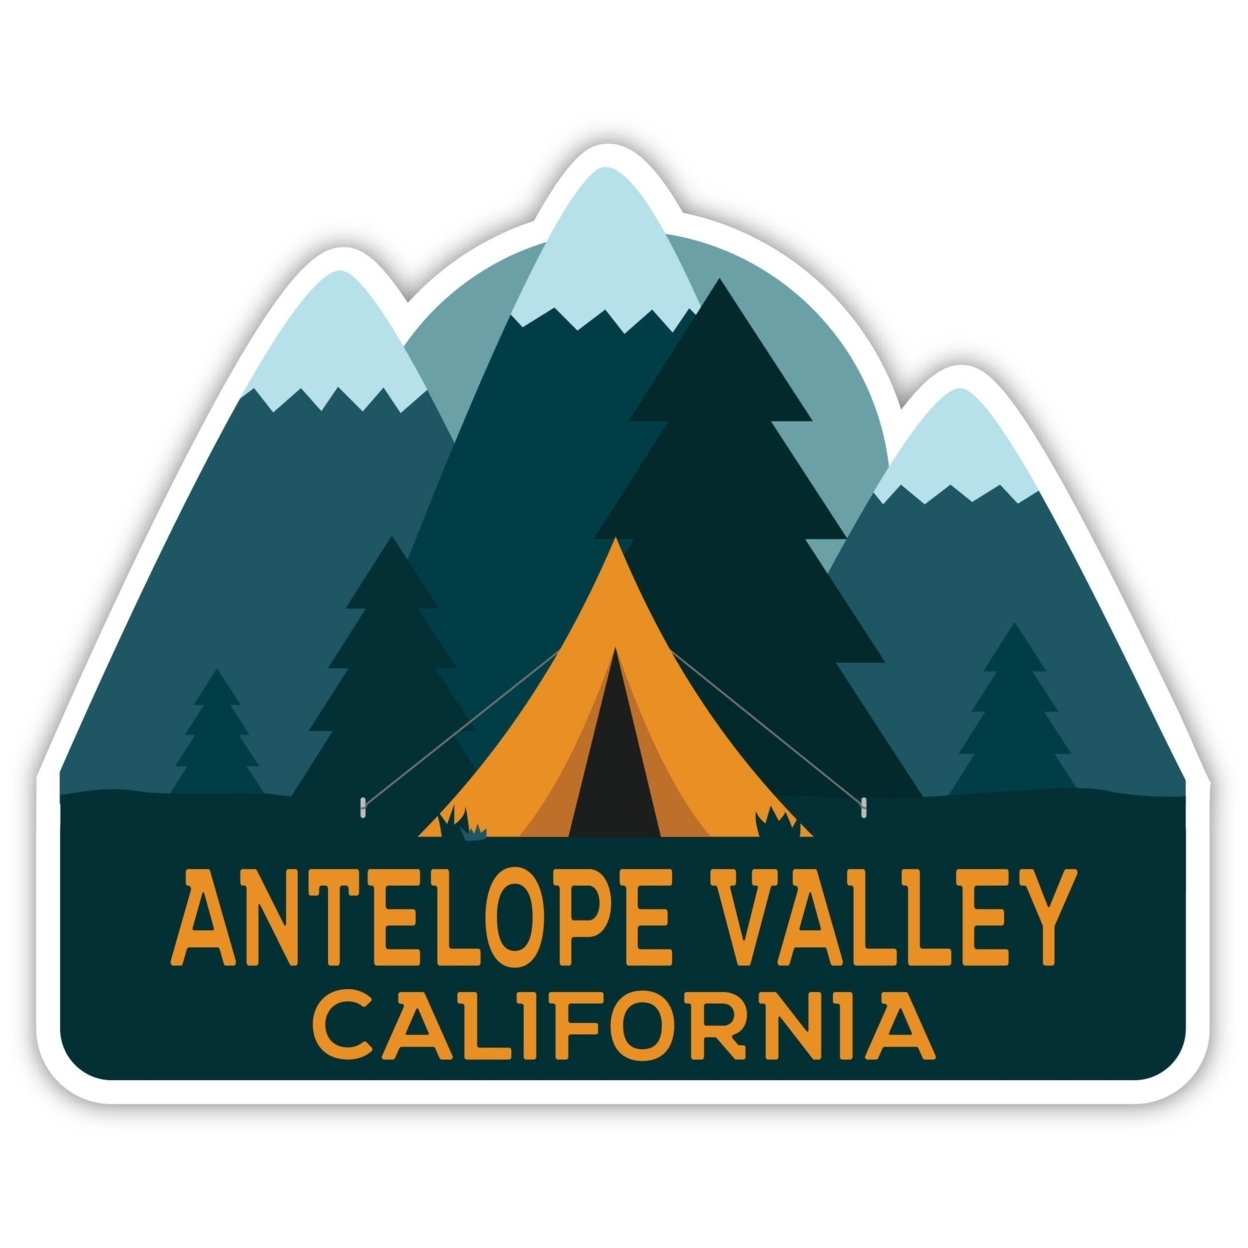 Antelope Valley California Souvenir Decorative Stickers (Choose Theme And Size) - Single Unit, 2-Inch, Bear